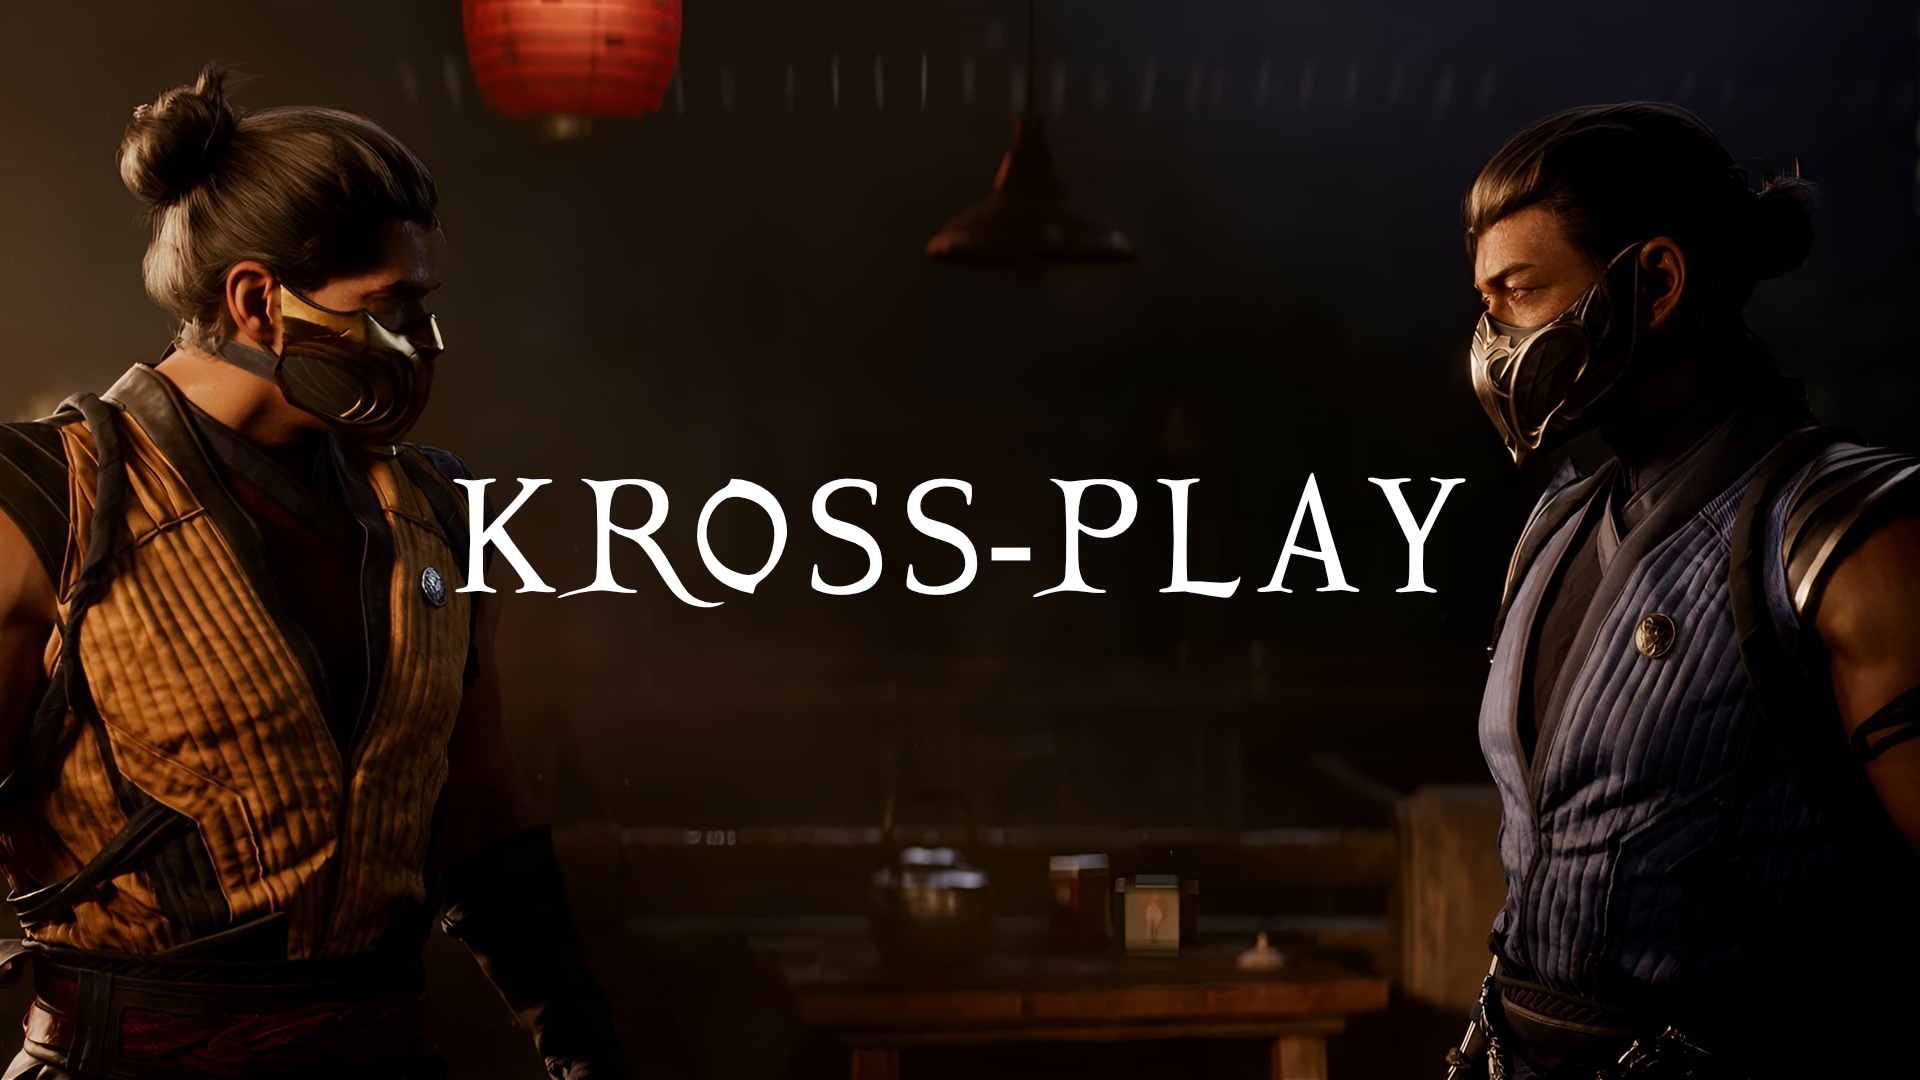 Mortal Kombat 1 Is the Series' Next Installment, Coming to PC, PS5